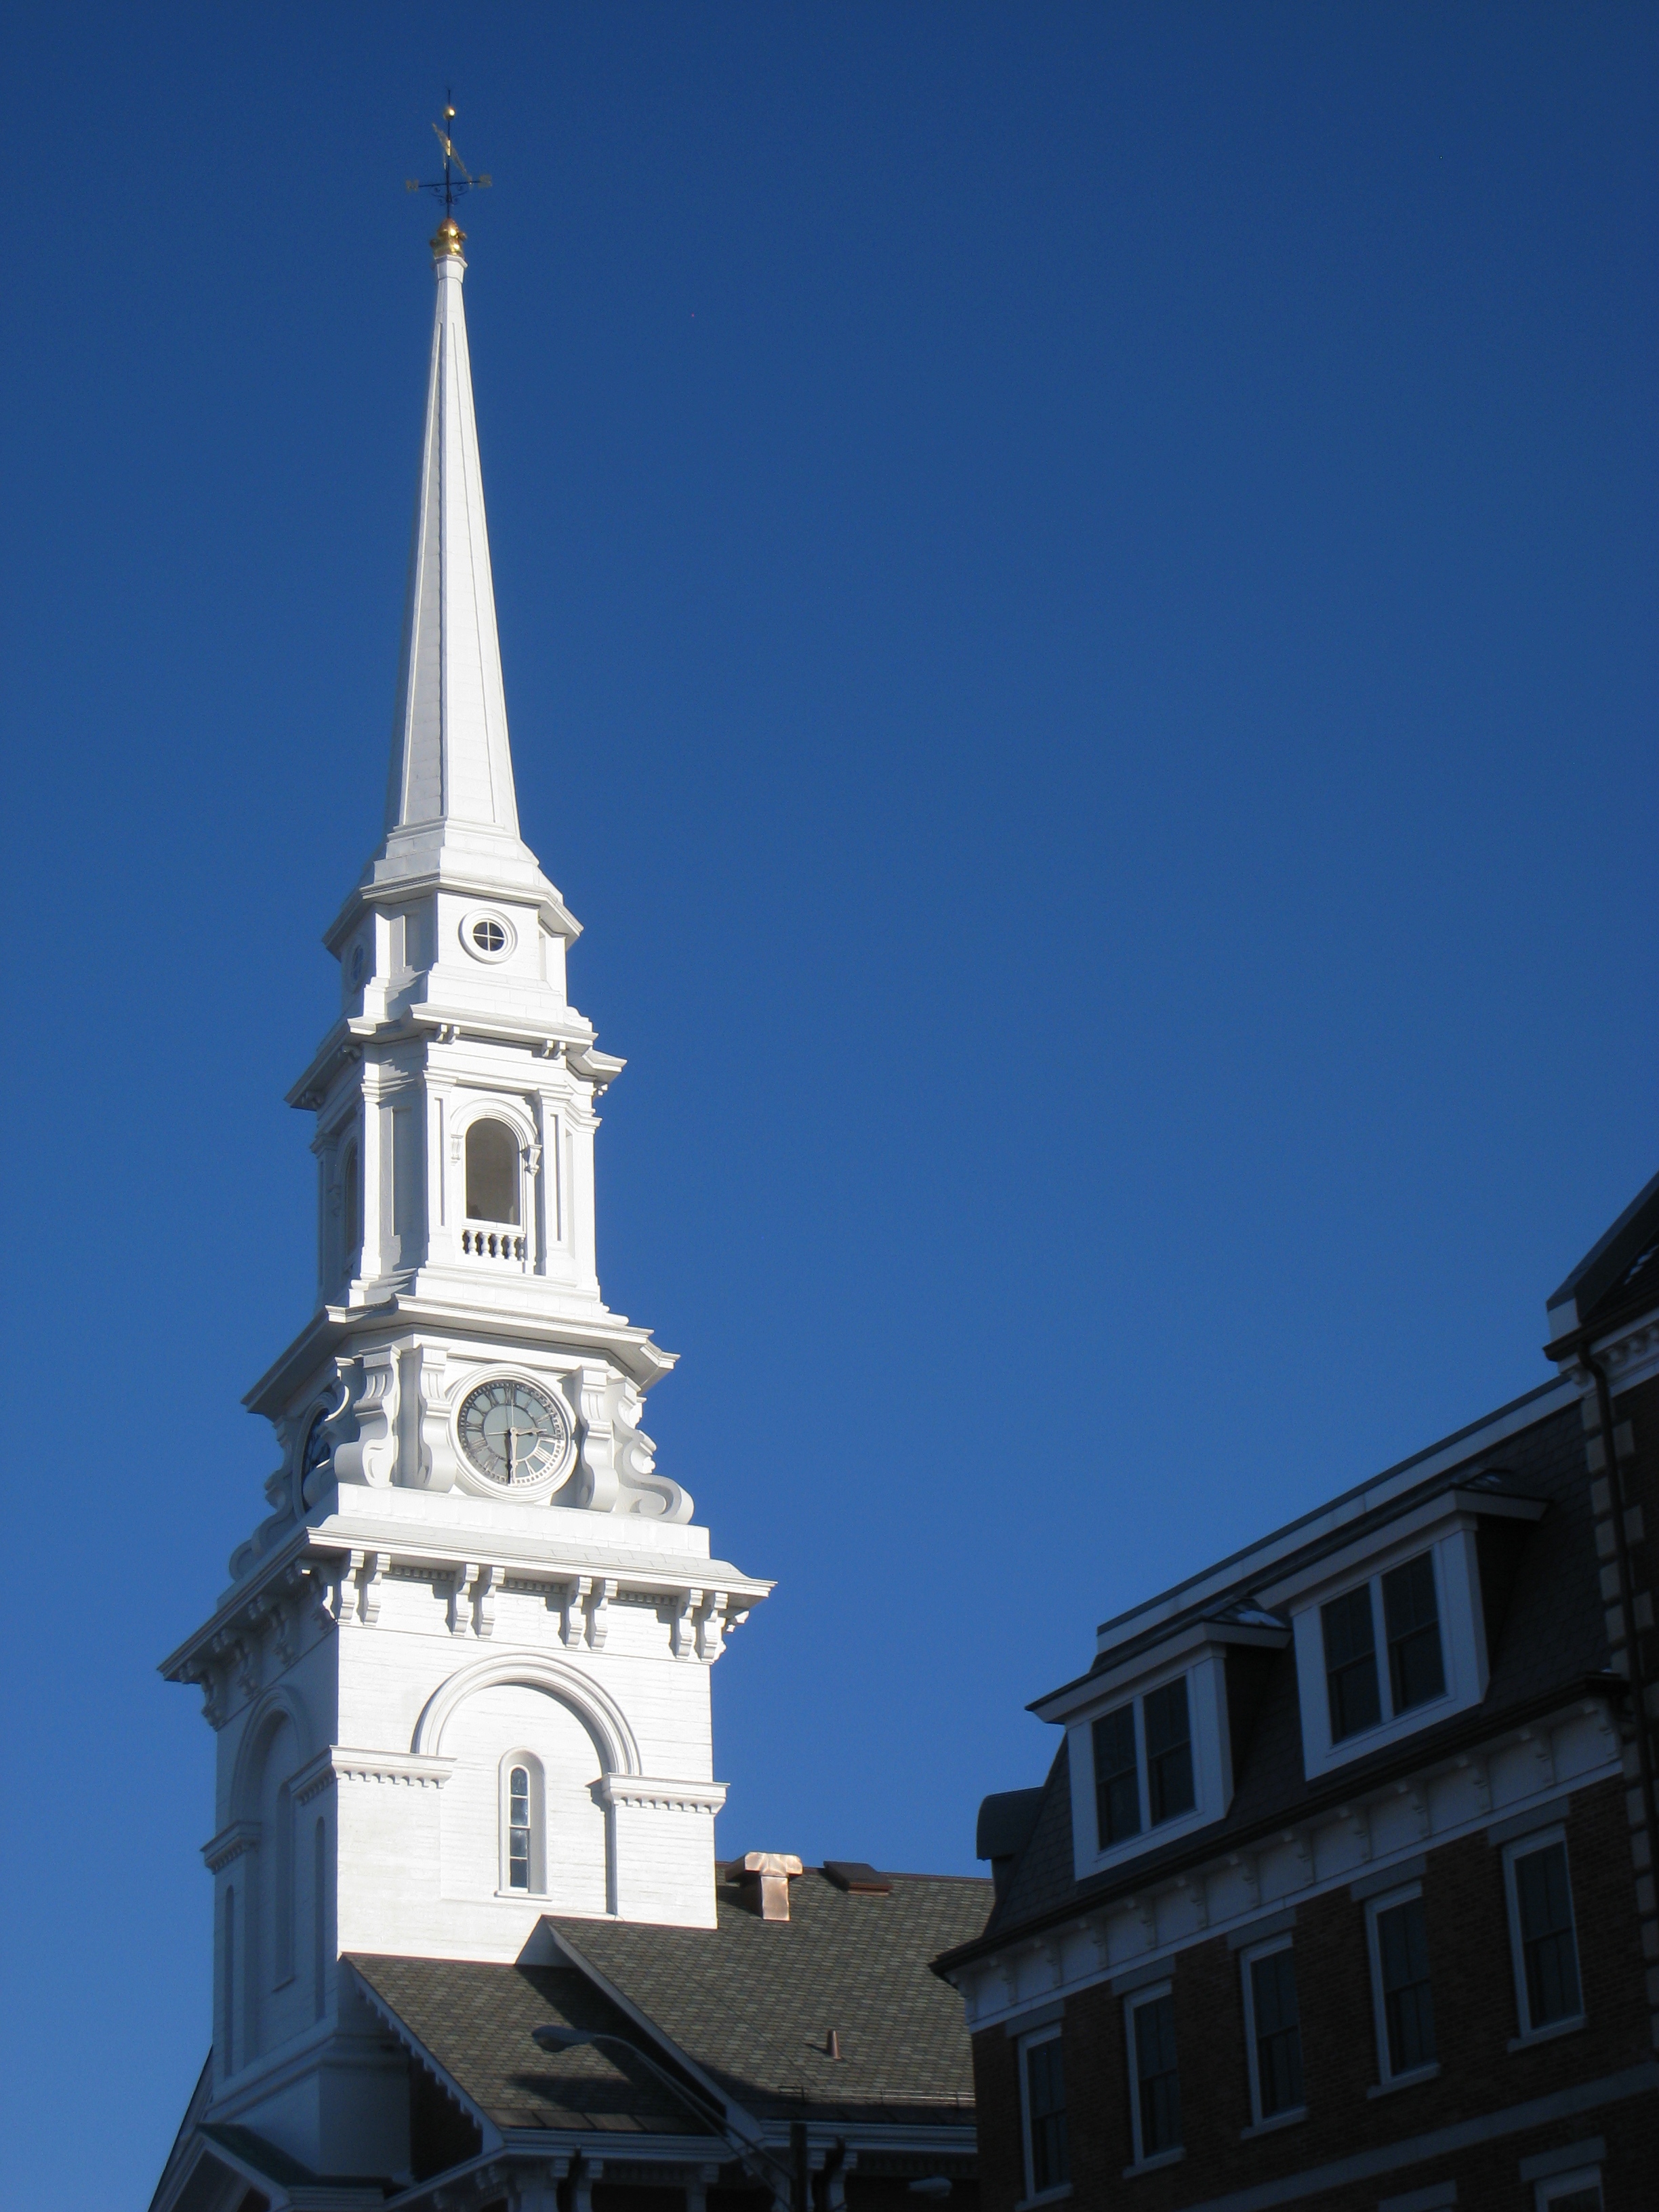 File:Portsmouth, NH - North Church steeple.JPG - Wikimedia Commons